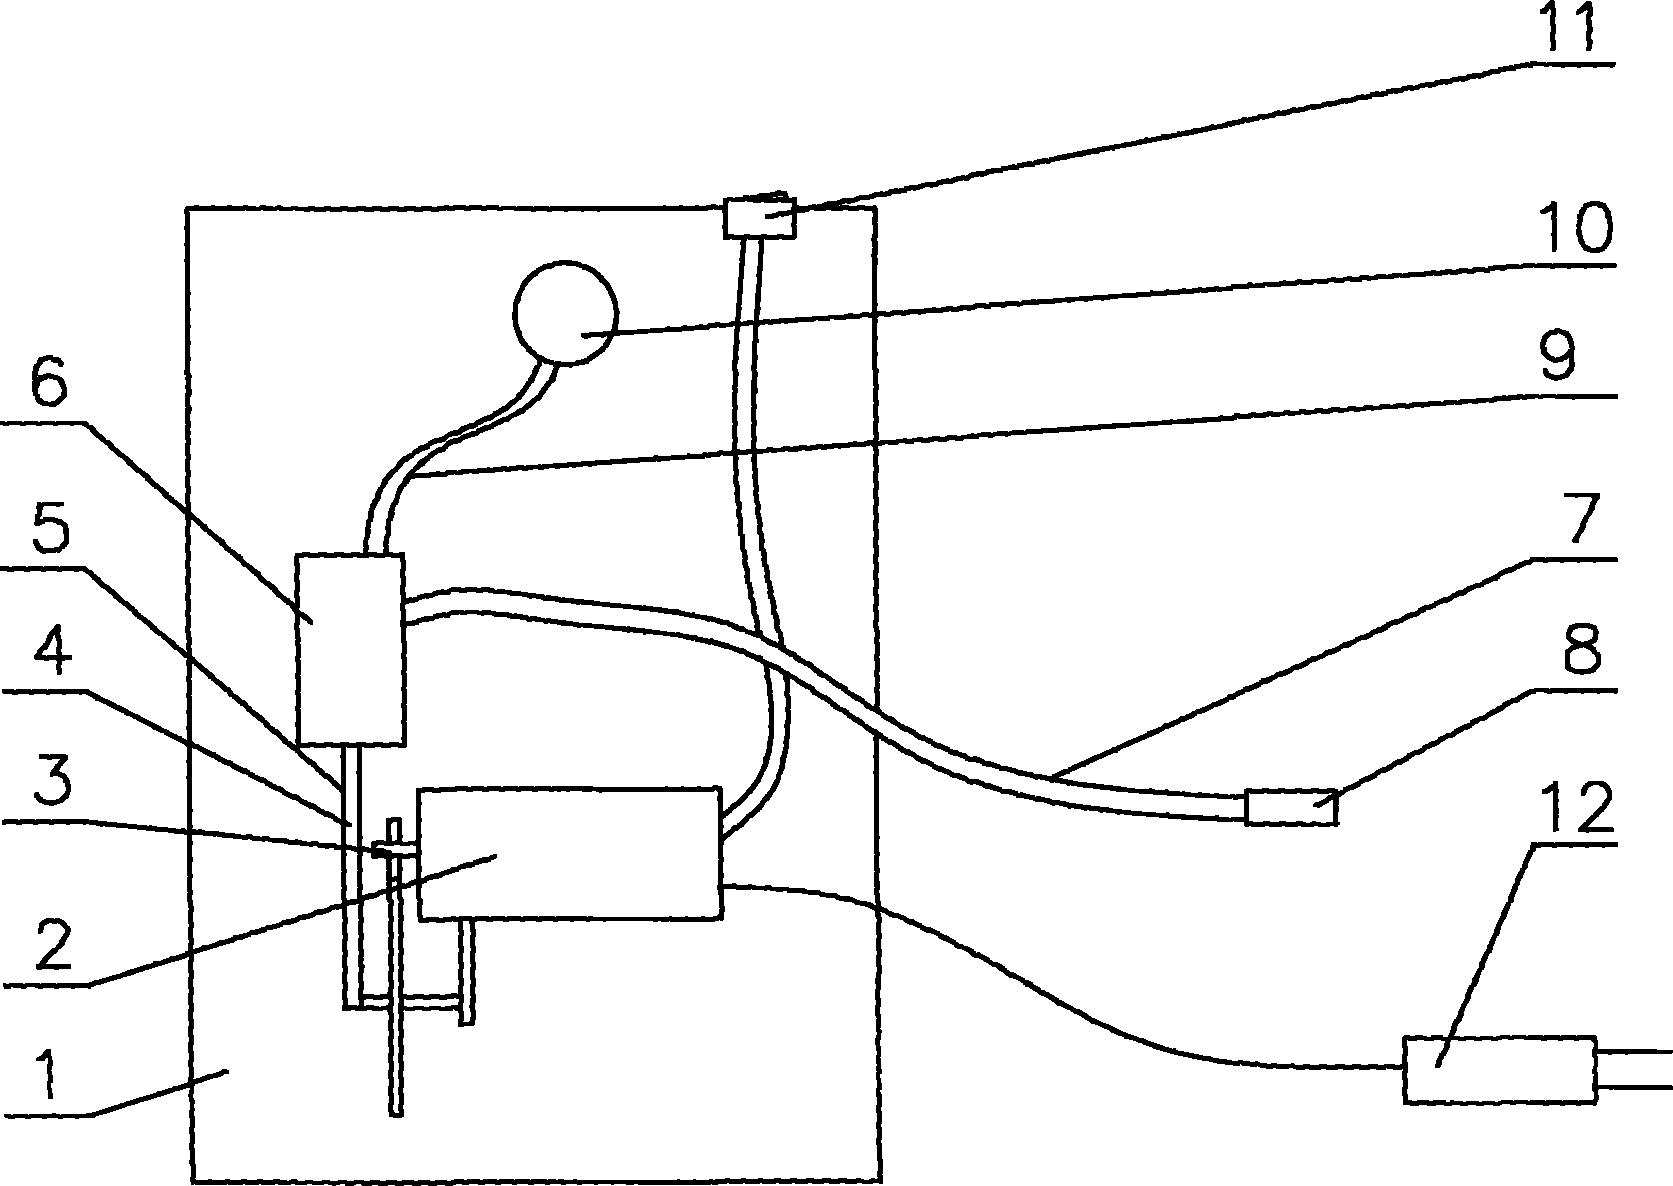 Gas-filling unit of electric vehicle